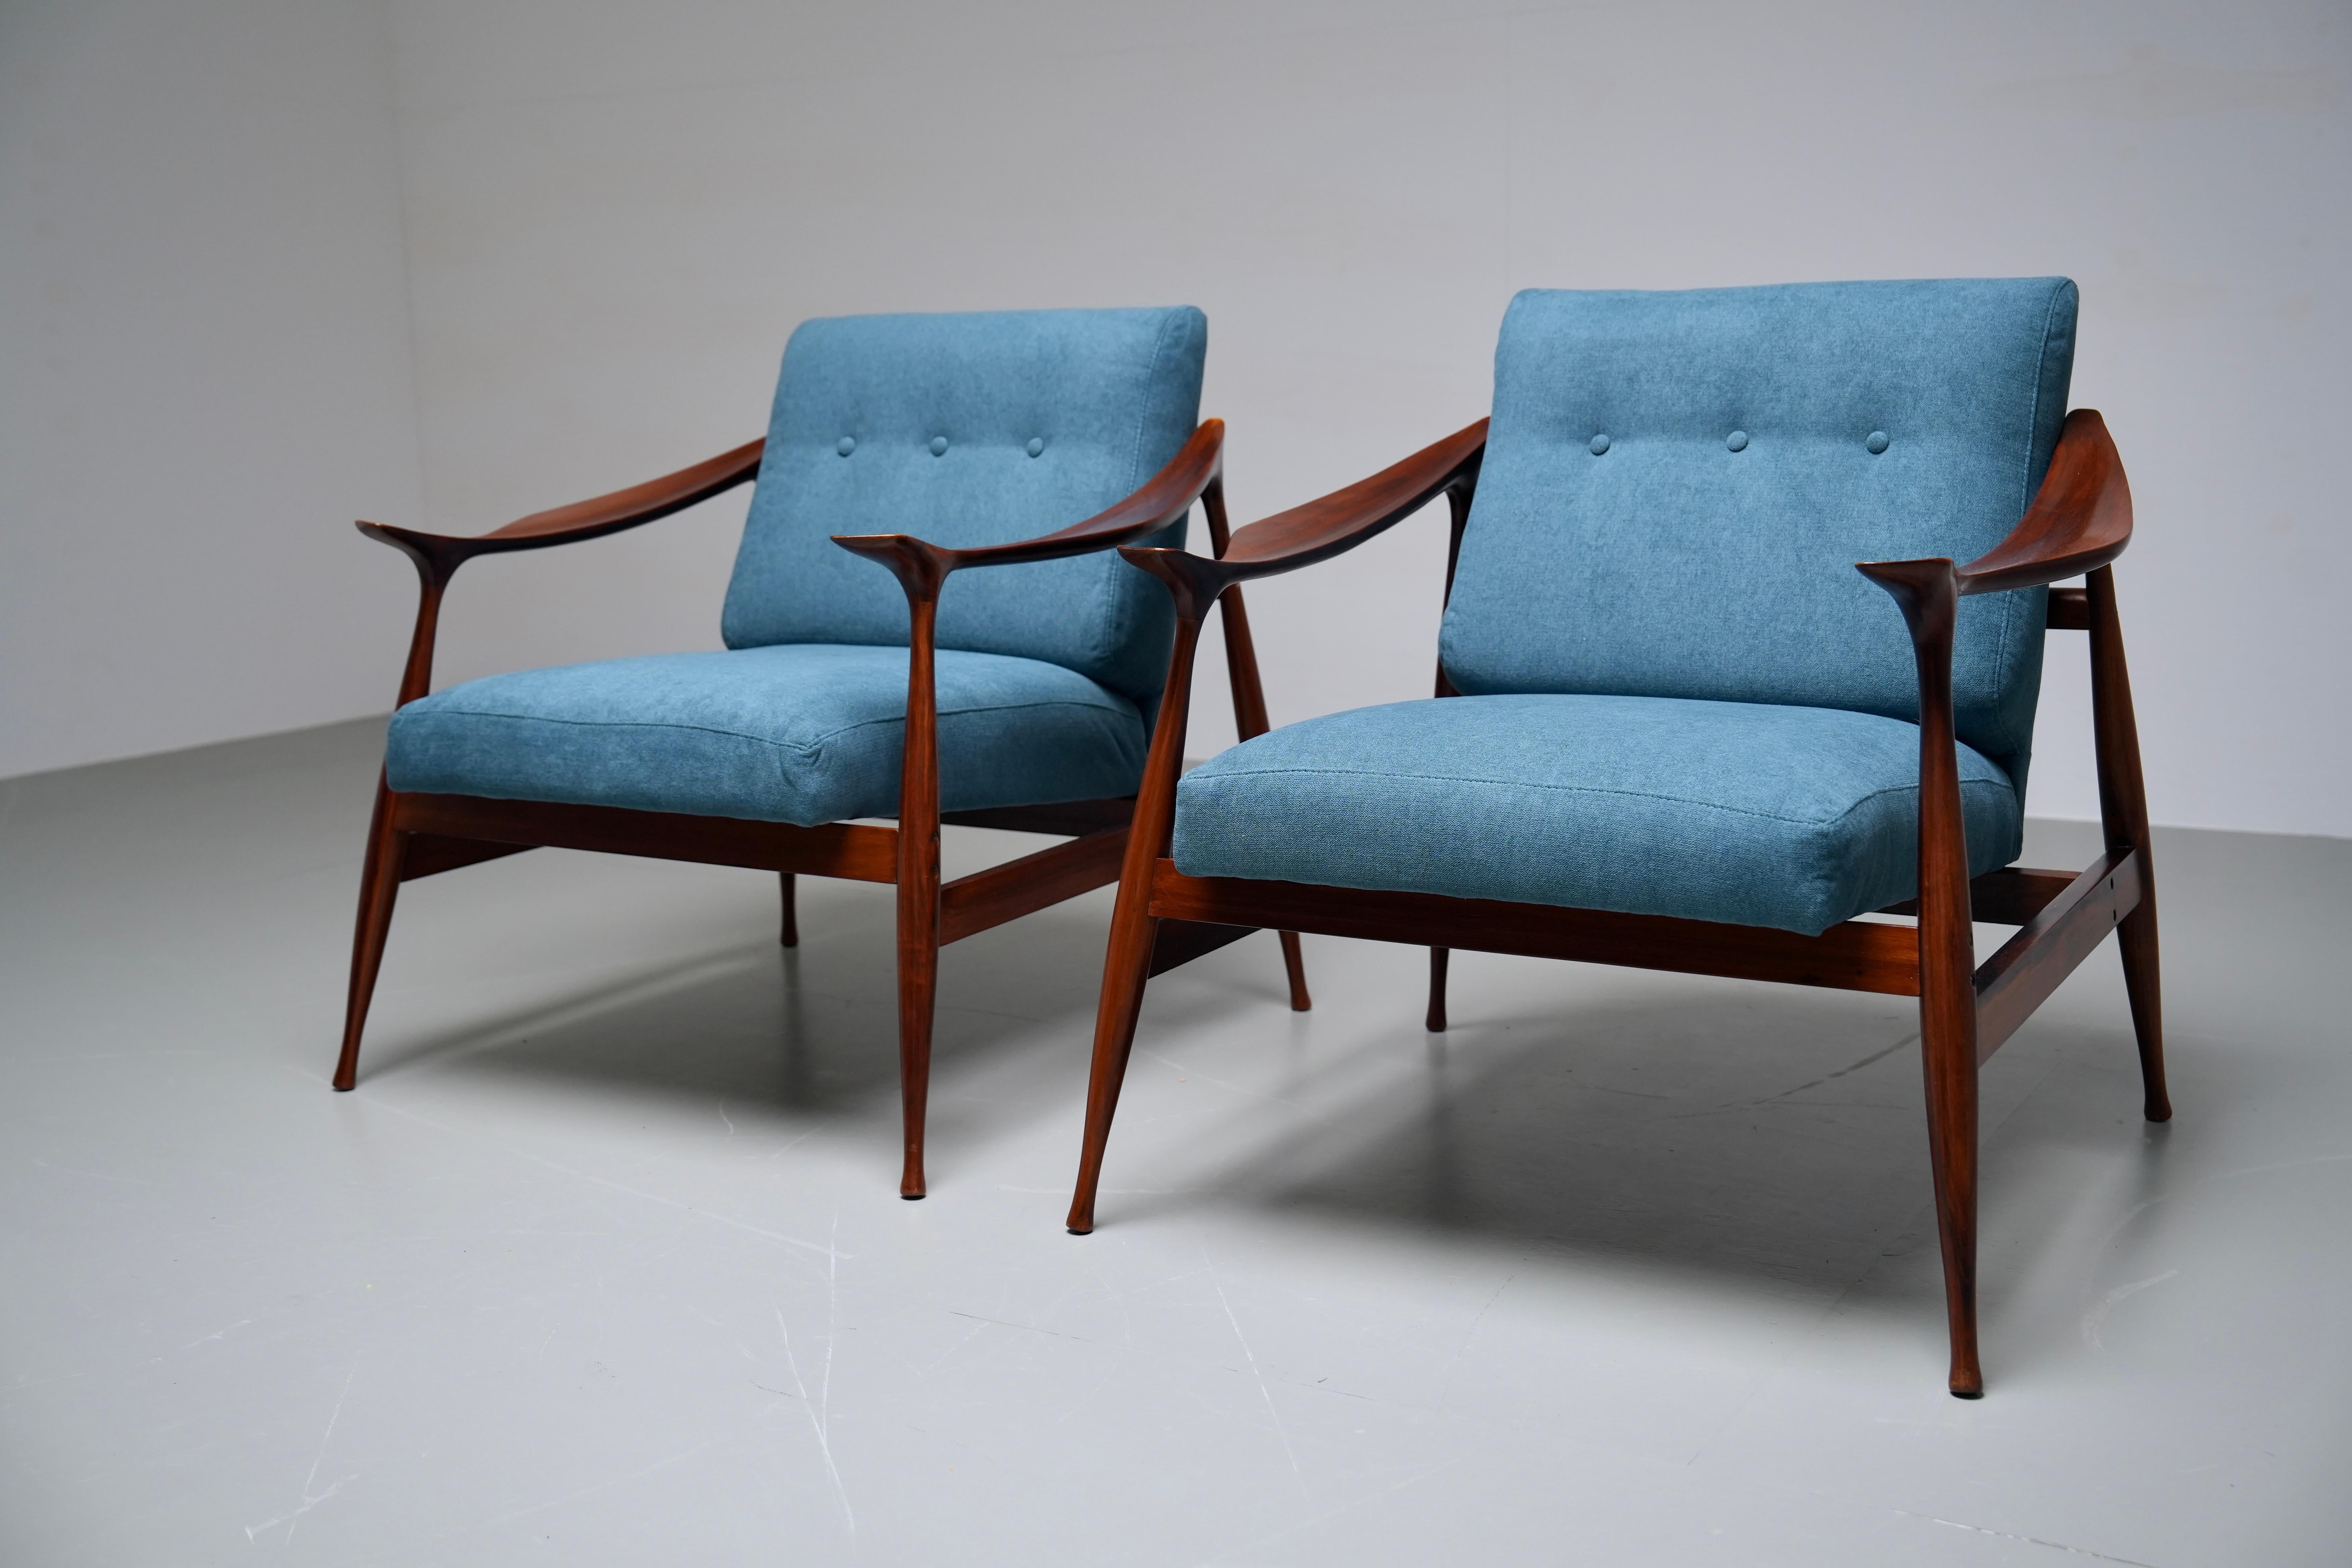 A very rare pair of “Lord” lounge chairs designed by Ico Parisi for Fratelli Reguitti, Italy, 1959. Elegant and sleek lounge chairs with a sculpted solid teak frame. High quality finishing and amazing refined details. The chairs are very comfortable